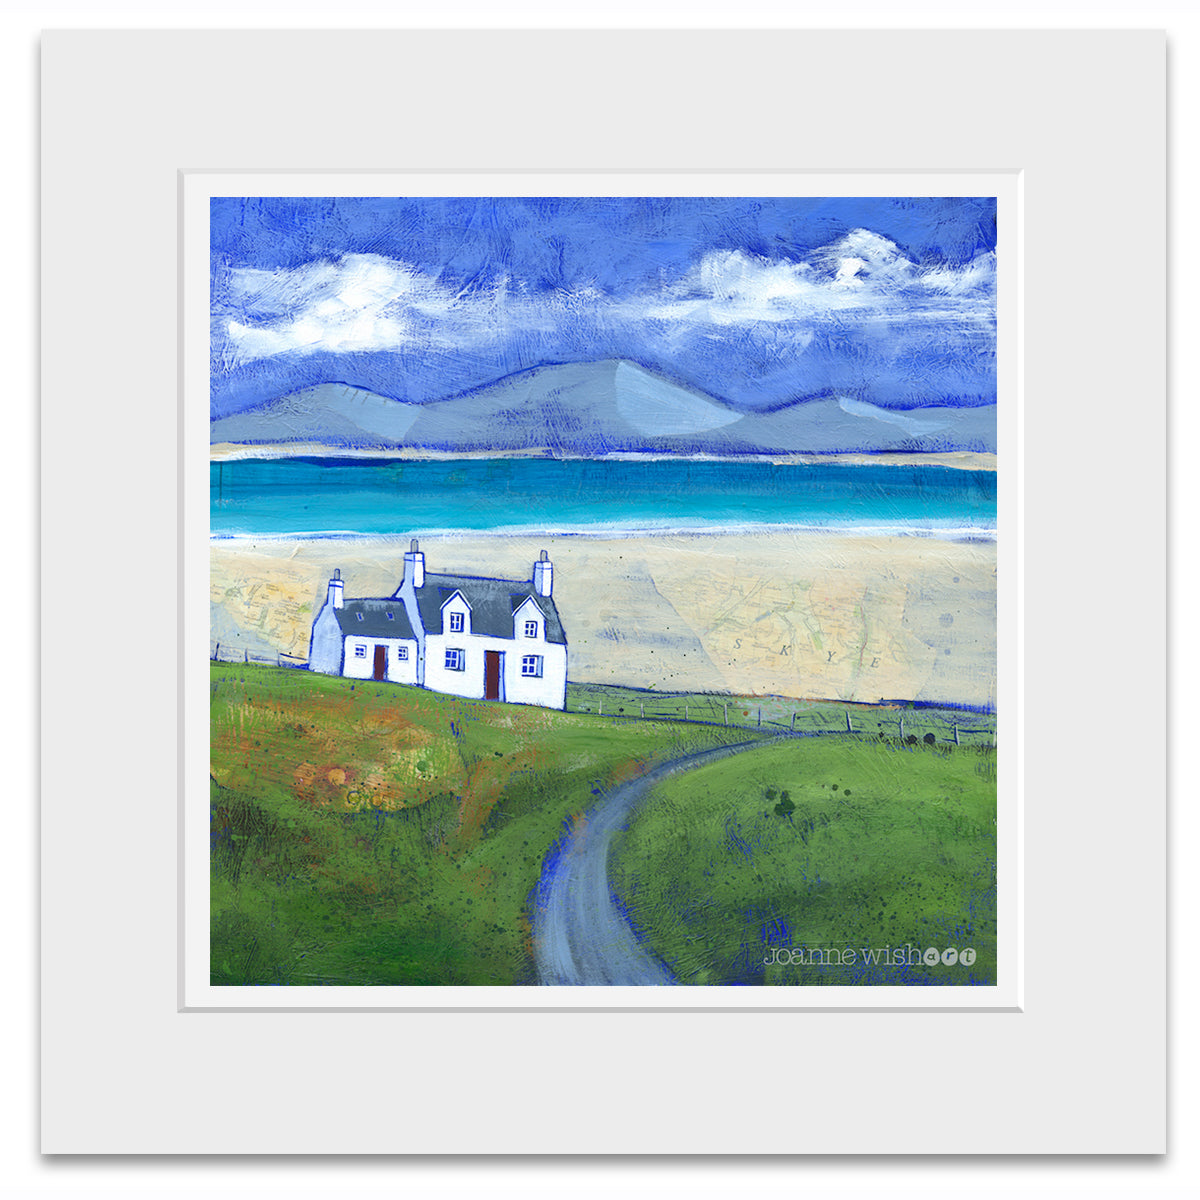 a mounted fine art print of the Isle of Sky featuring a white stone cottage.